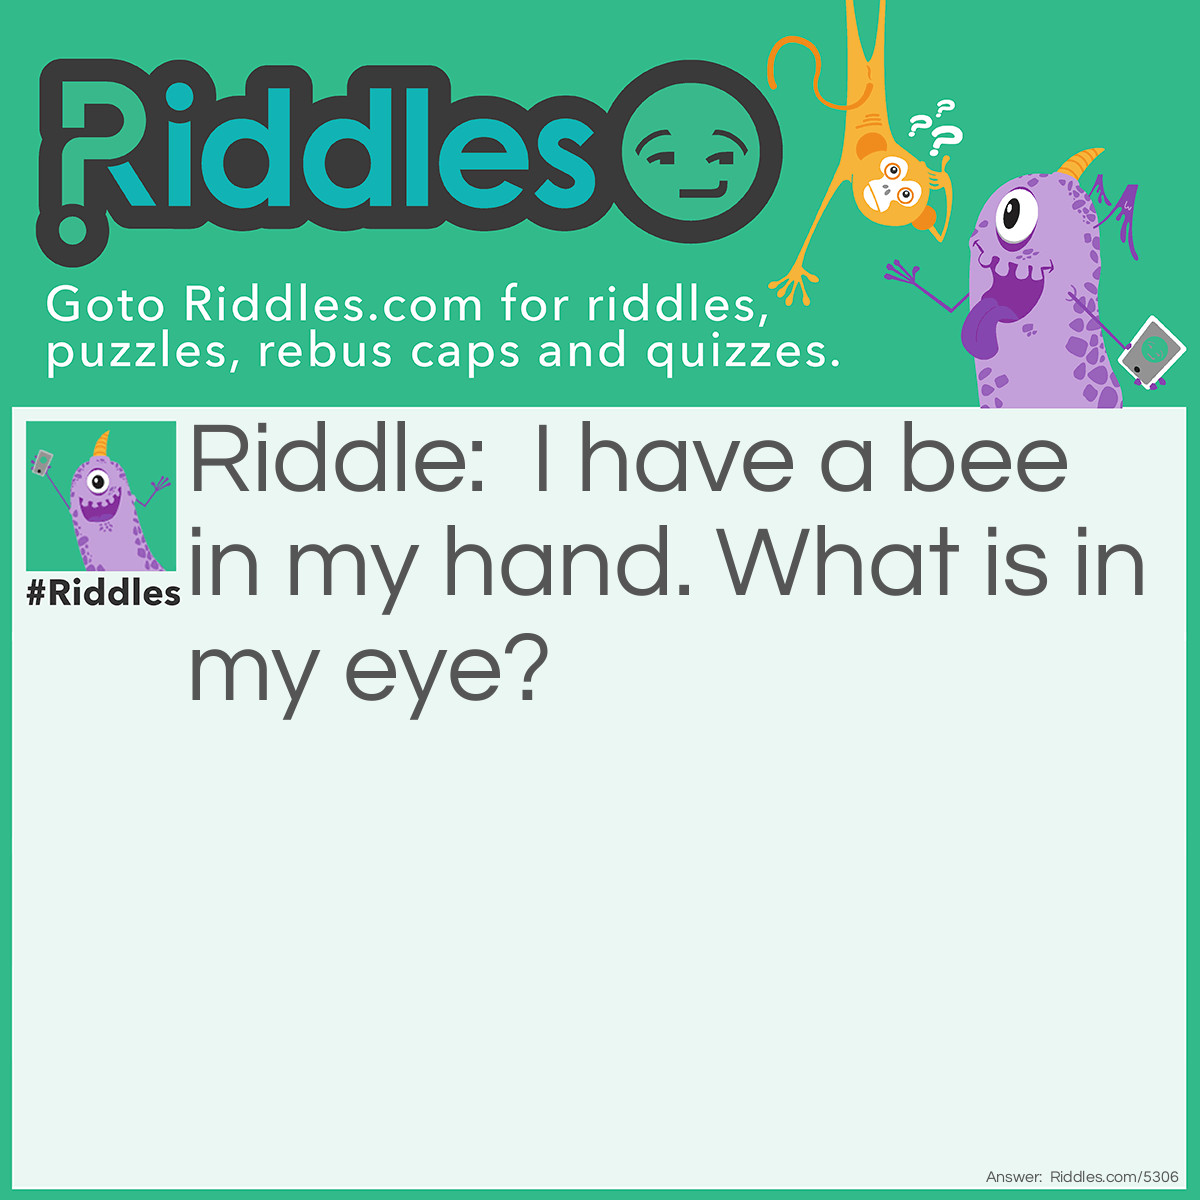 Riddle: I have a bee in my hand. What is in my eye? Answer: Beauty, as beauty is in the eye of the BEE-holder.